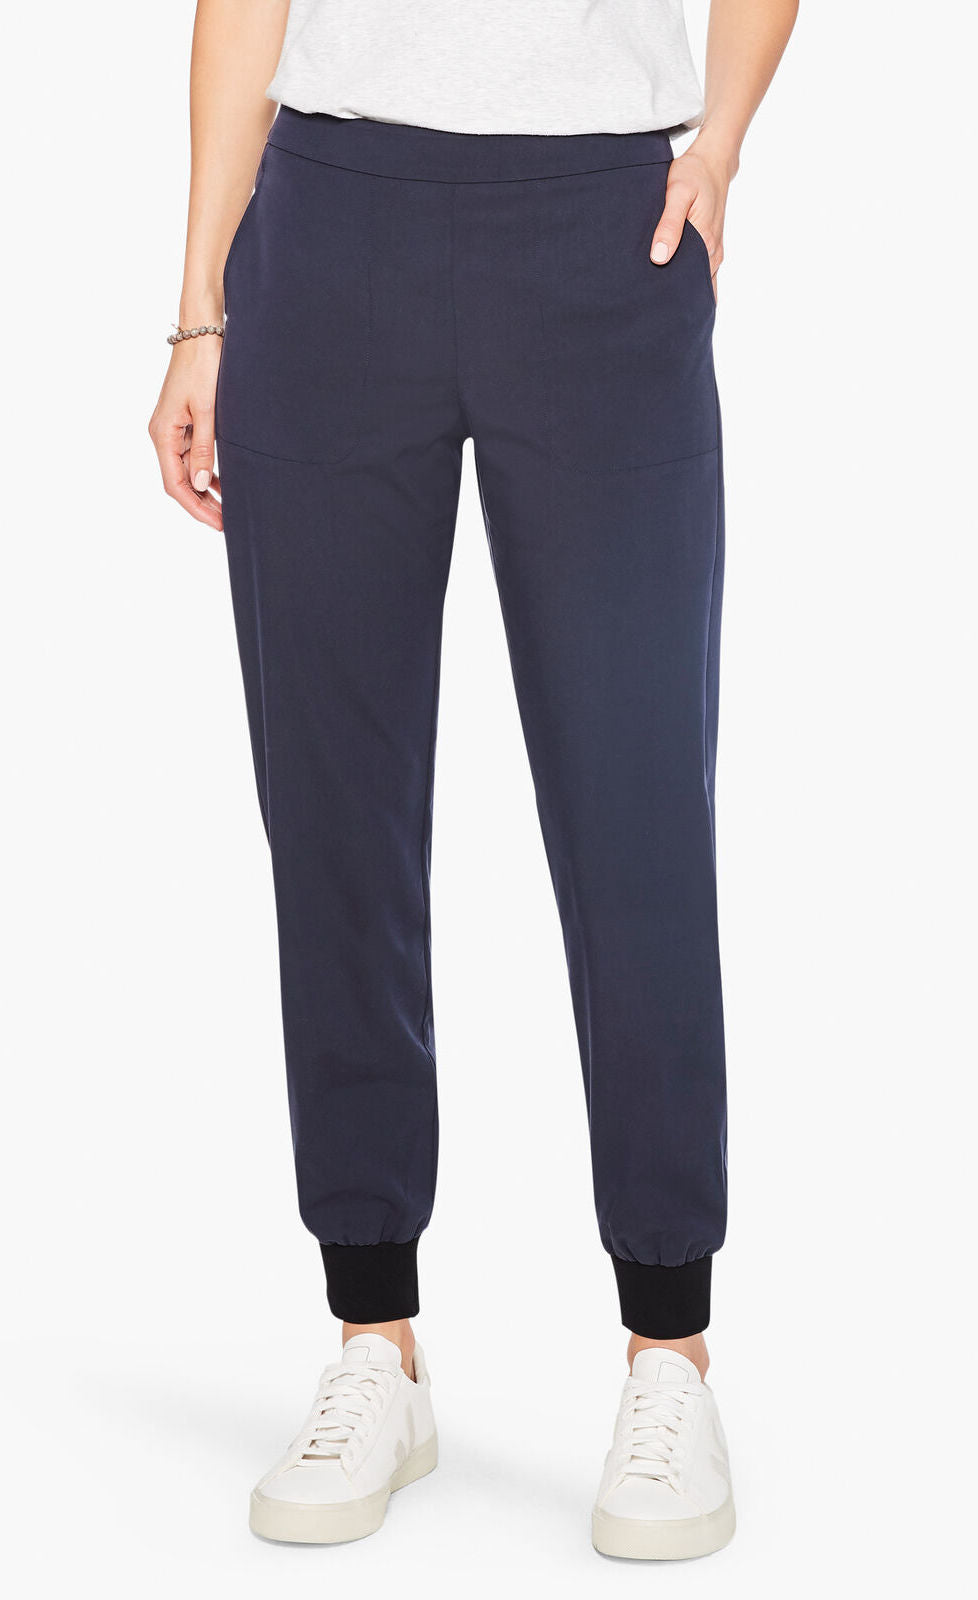 Front bottom half view of a woman wearing the nic and zoe stretch tencel jogger. These joggers are dark indigo with a tapered fit and side pockets.